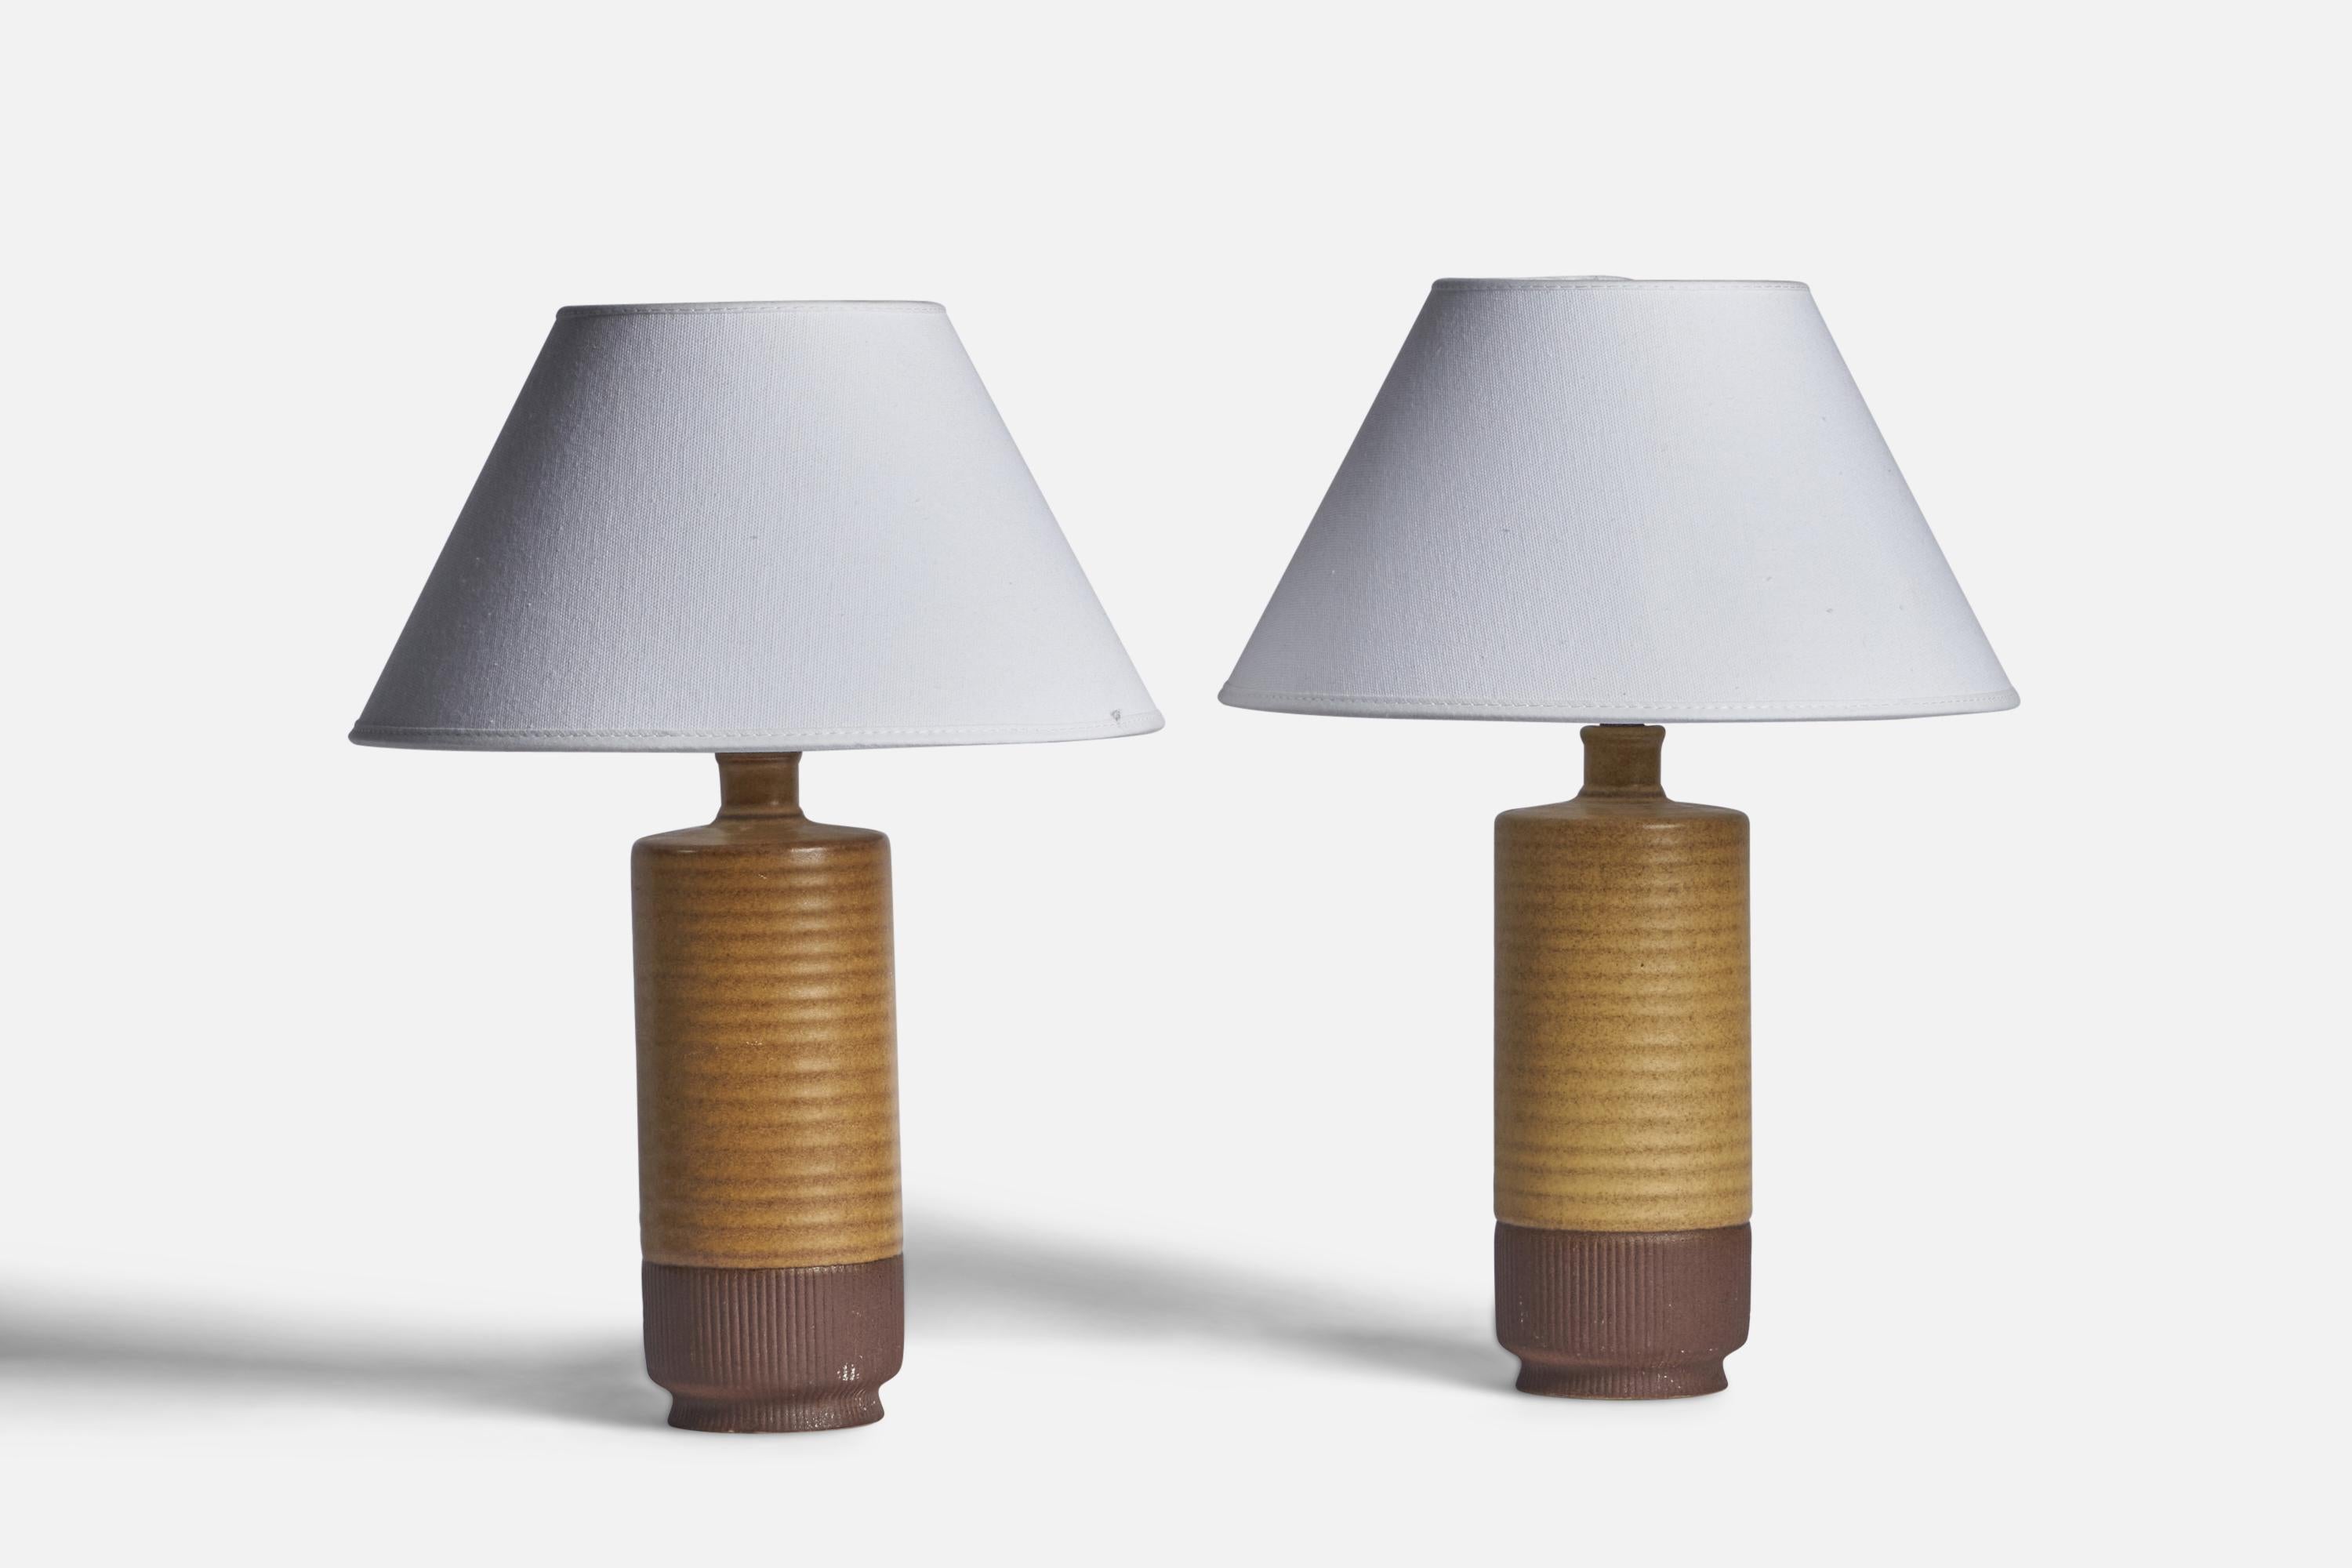 A pair of yellow beige and brown-glazed stoneware table lamps designed by Gunnar Nylund and produced by Rörstrand, Sweden, 1940s.

Dimensions of Lamp (inches): 10.5” H x 3.2” Diameter
Dimensions of Shade (inches): 4.5” Top Diameter x 10” Bottom